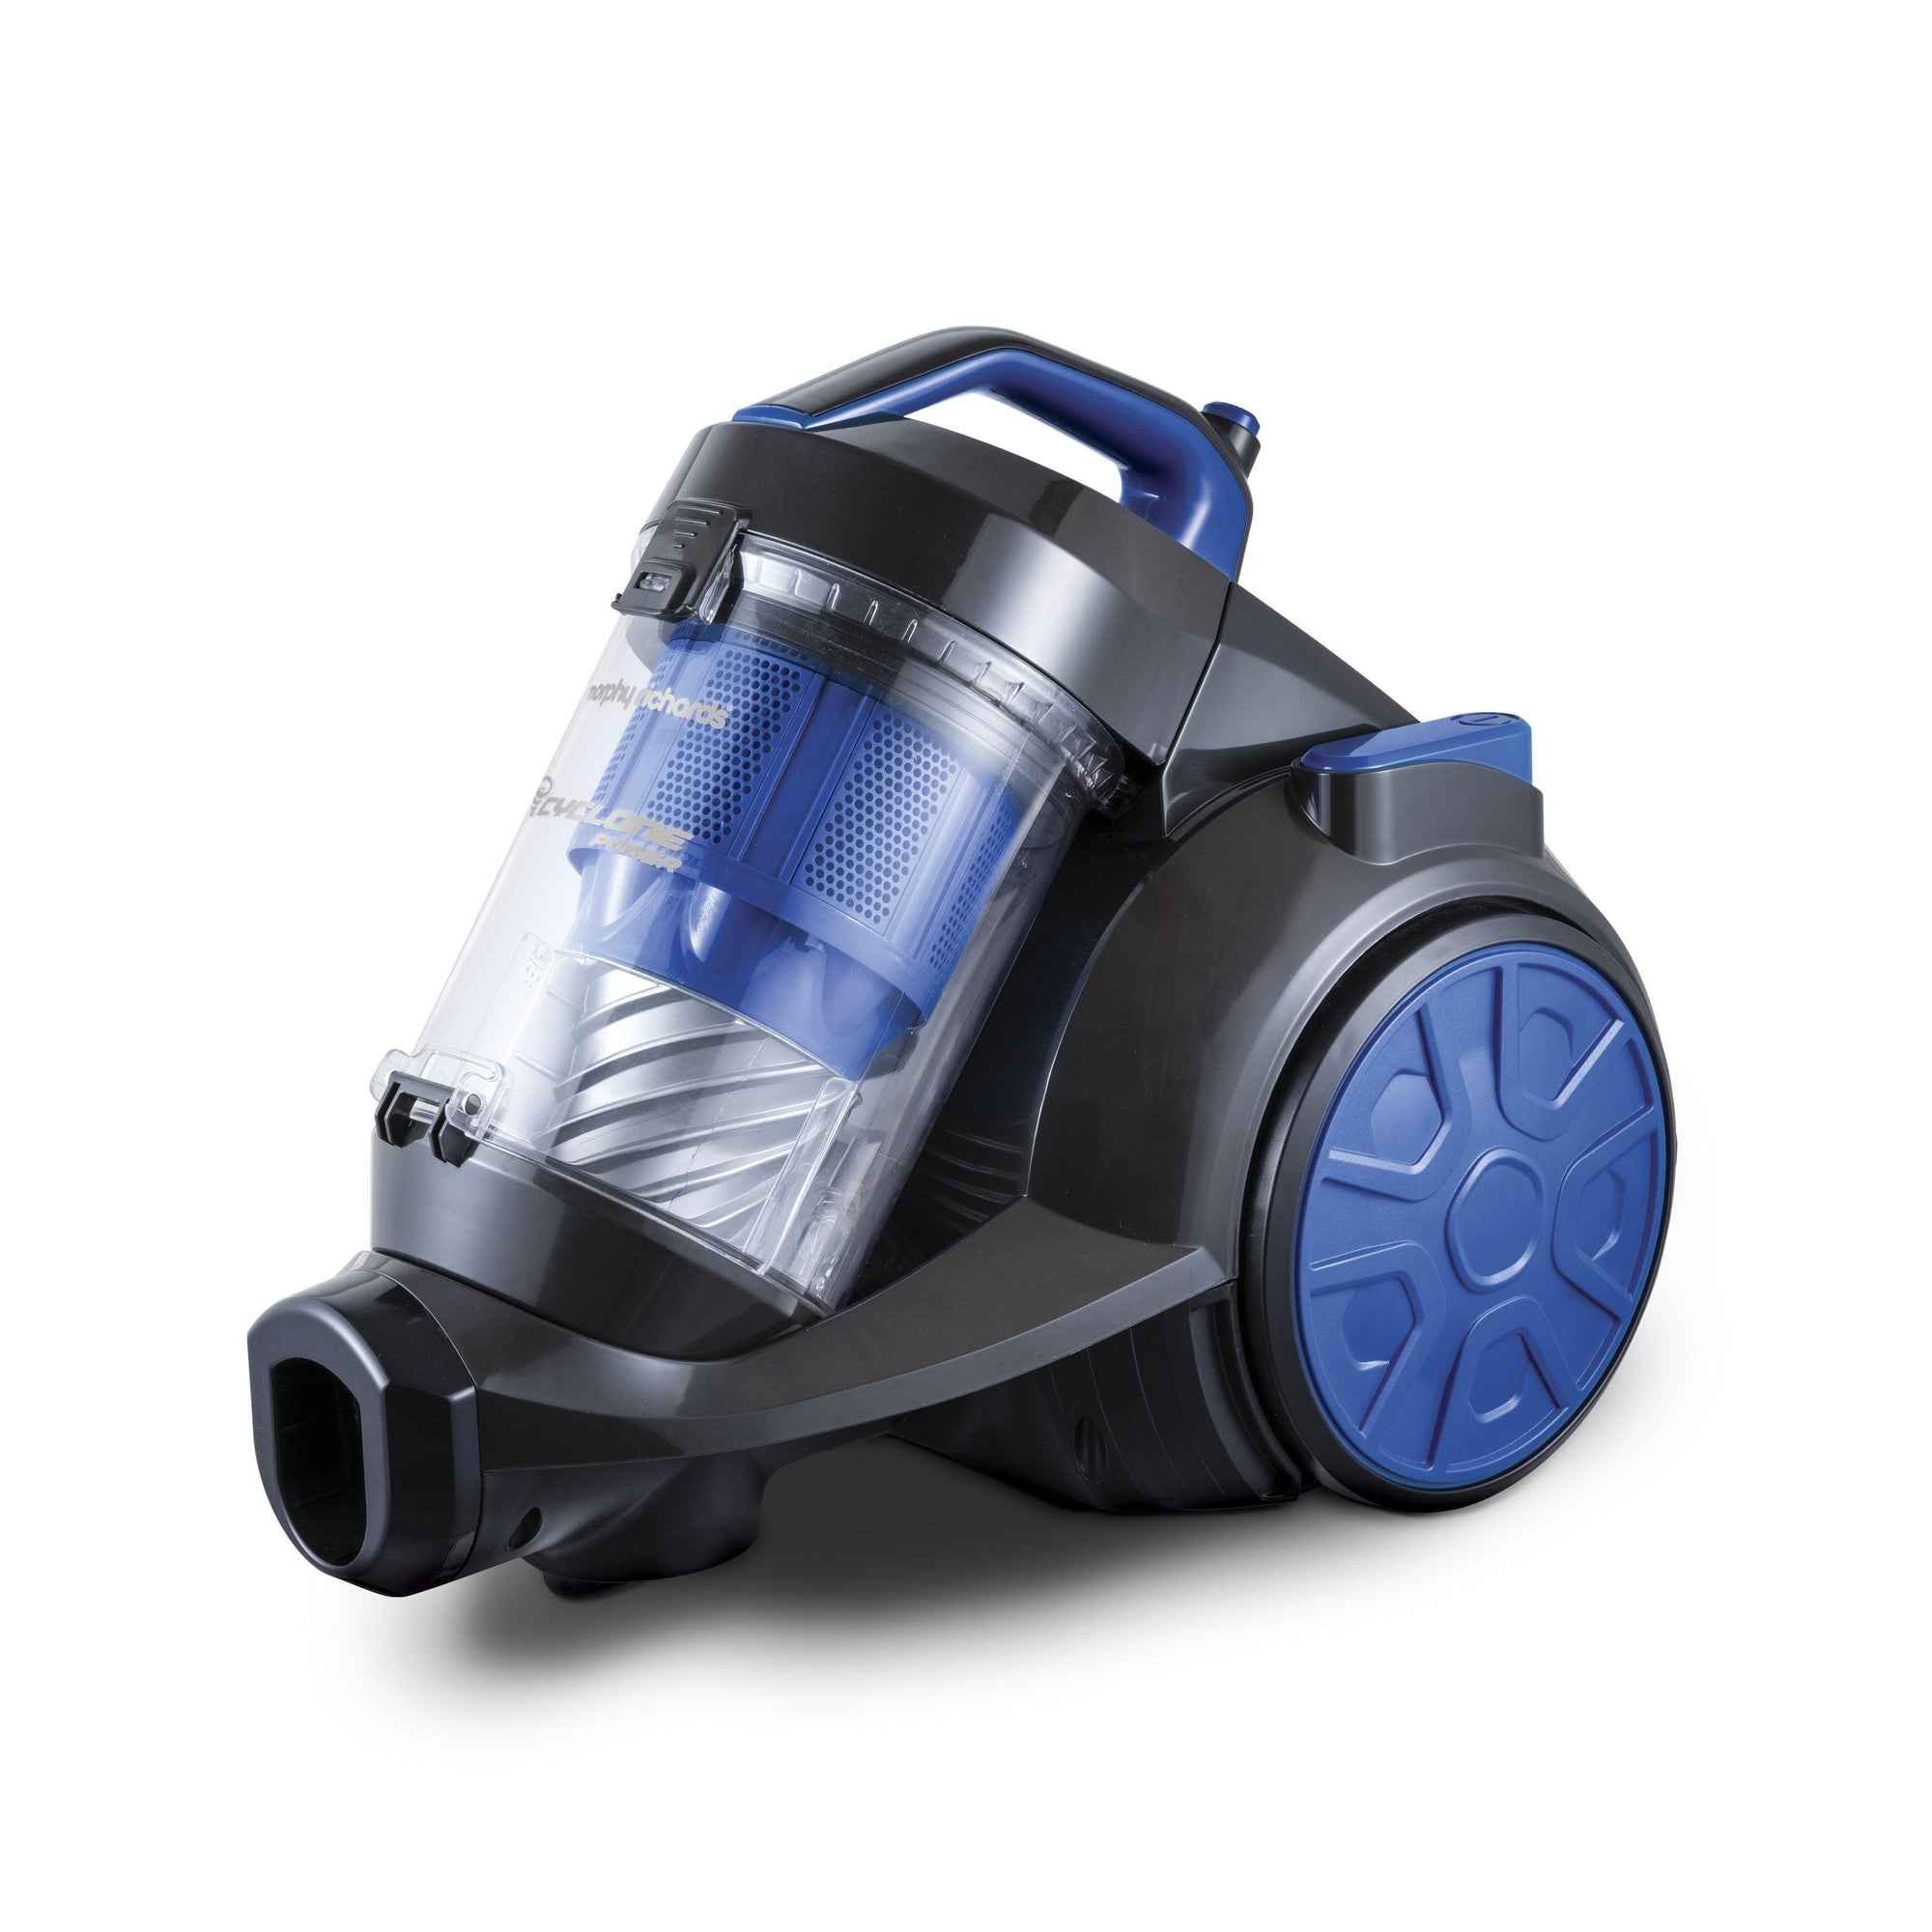 Morphy Richards Multi Cyclonic Bagless Cylinder Vacuum Cleaner - Graphite & Blue (7245578633404)